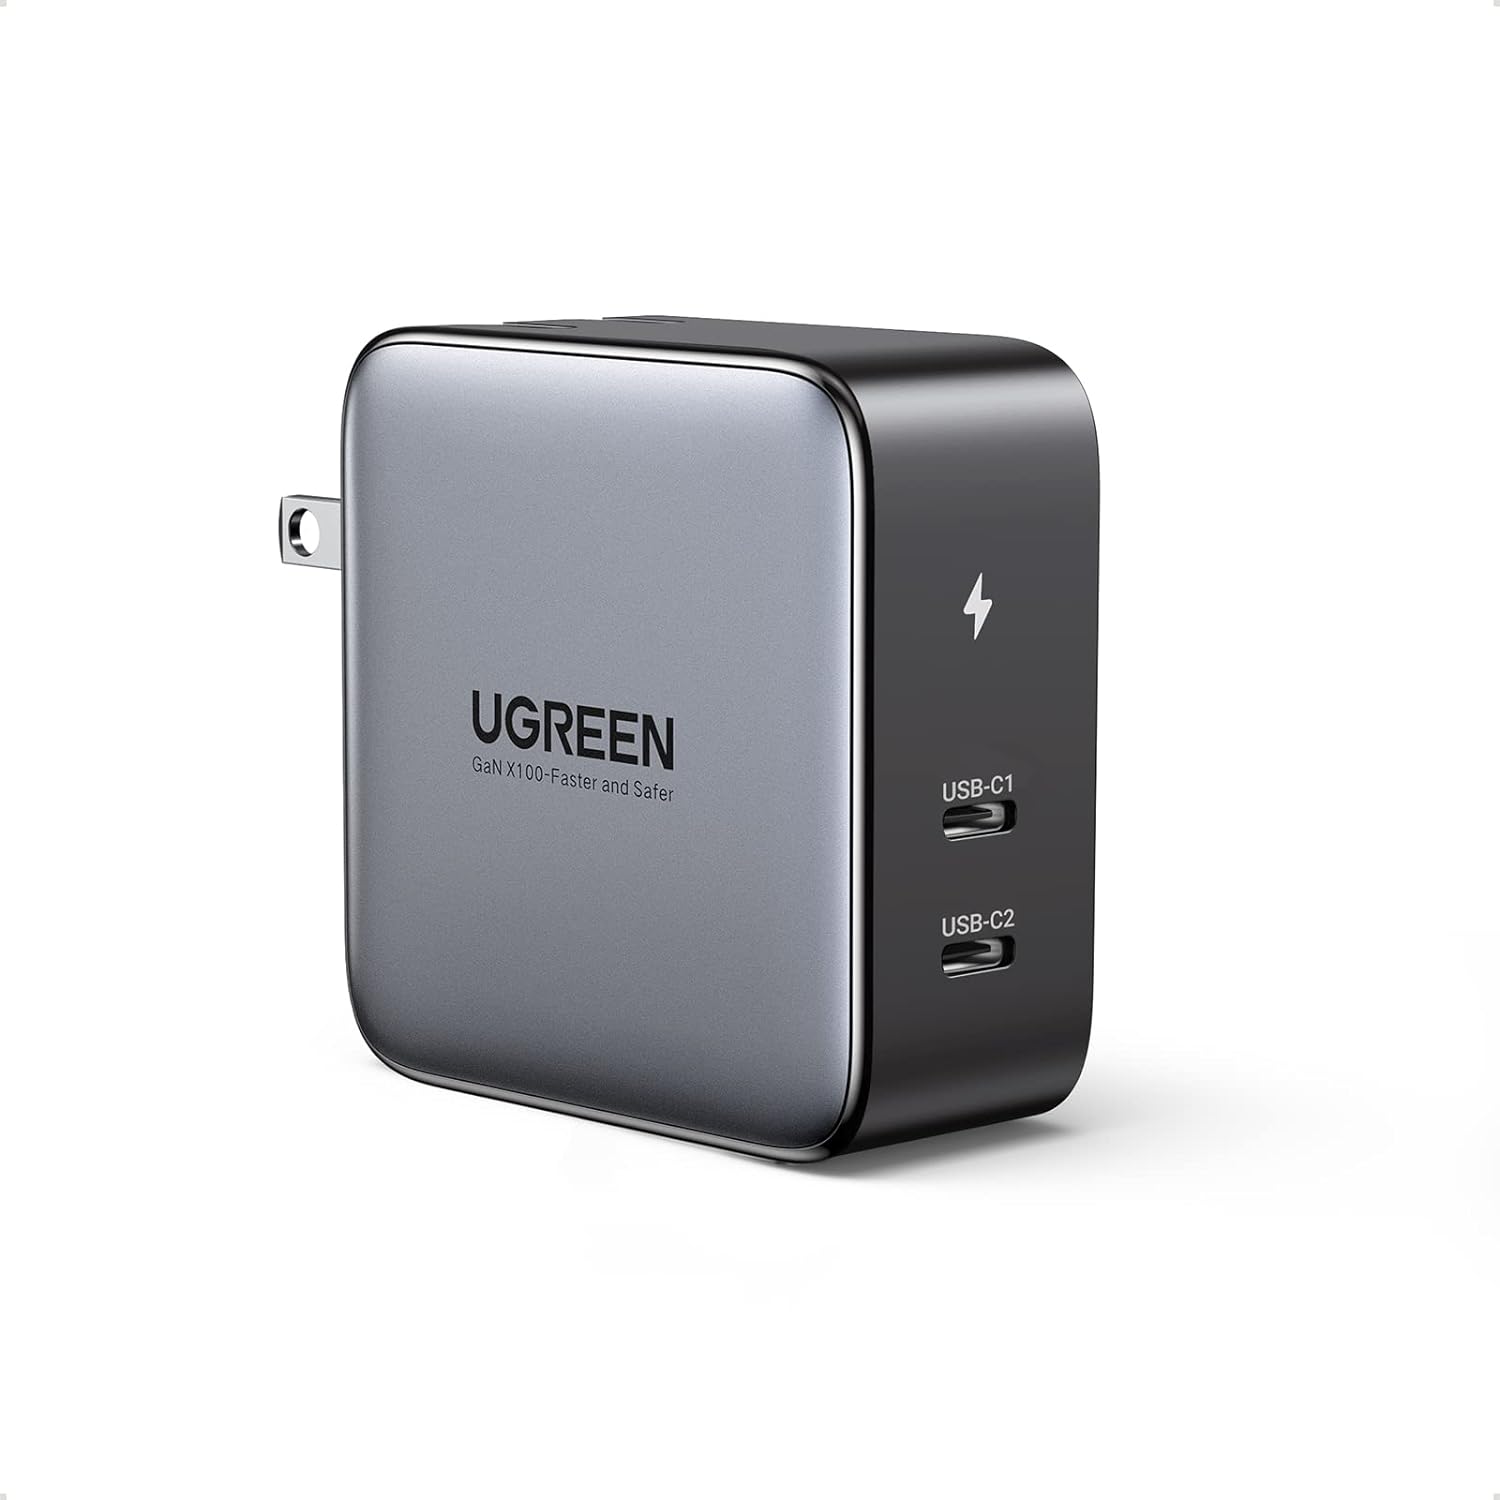 UGREEN 200W GaN Charger Desktop Laptop Fast Charger 6 in 1 Adapter